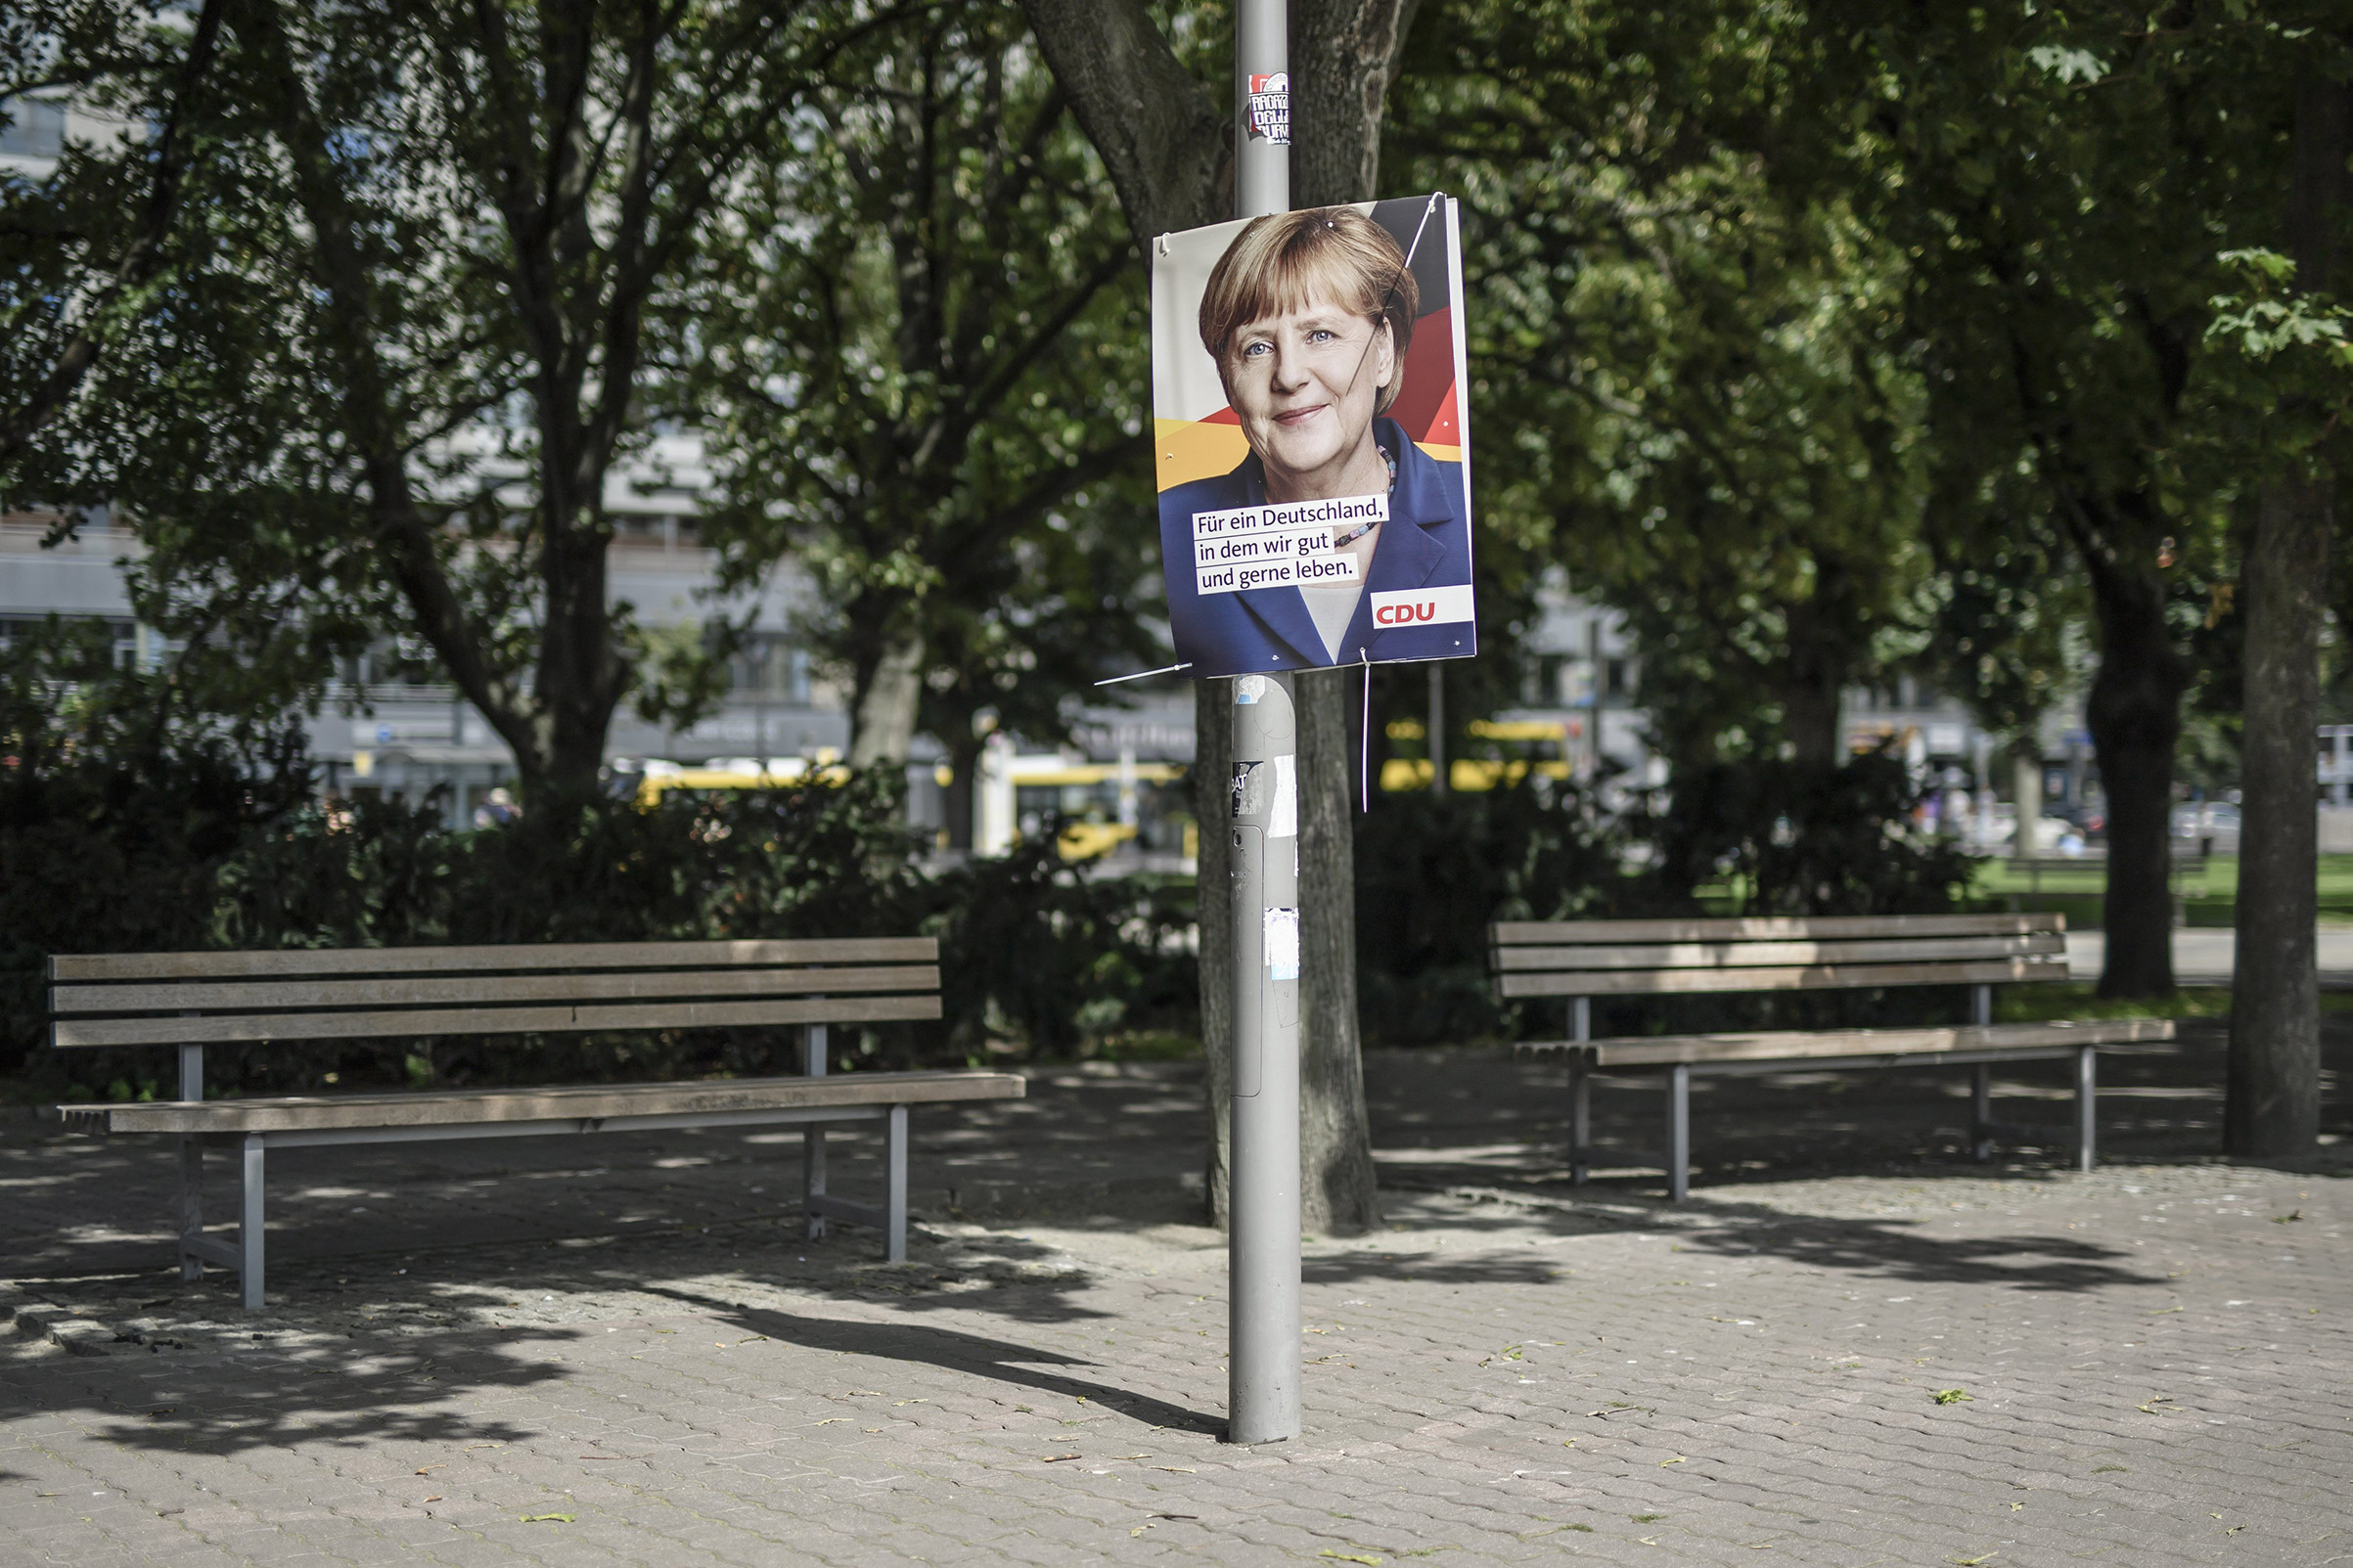 A campaign poster for Chancellor Angela Merkel in Berlin. The text reads, "For a Germany in which we live well and in which we like to live." (Clemens Bilan—EPA)